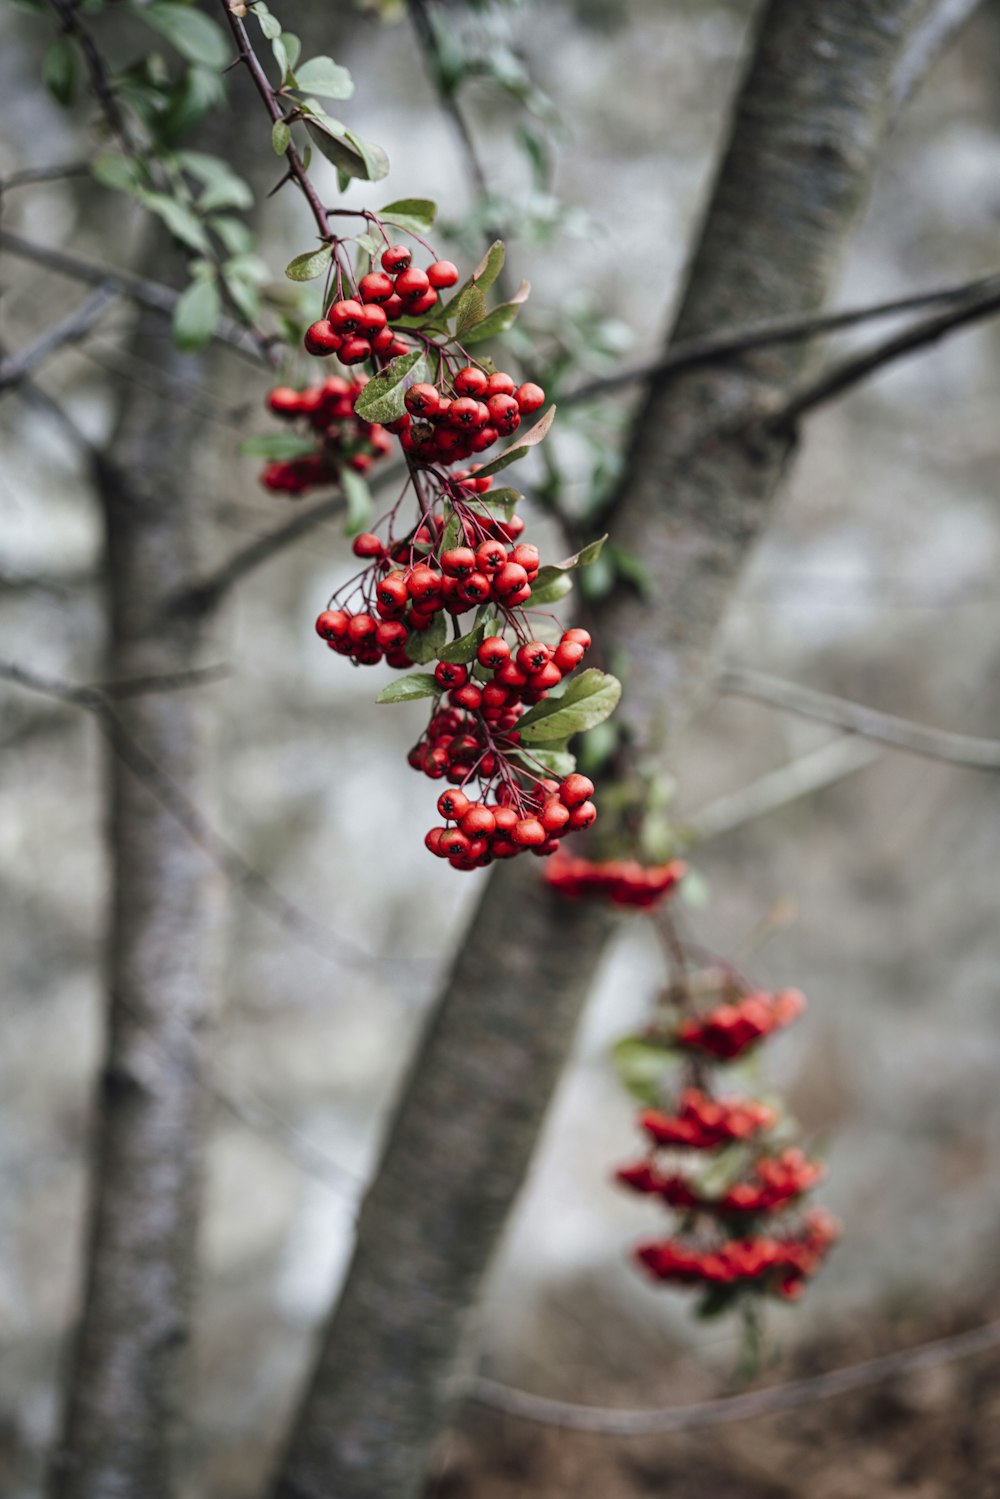 red and green round fruits on tree branch